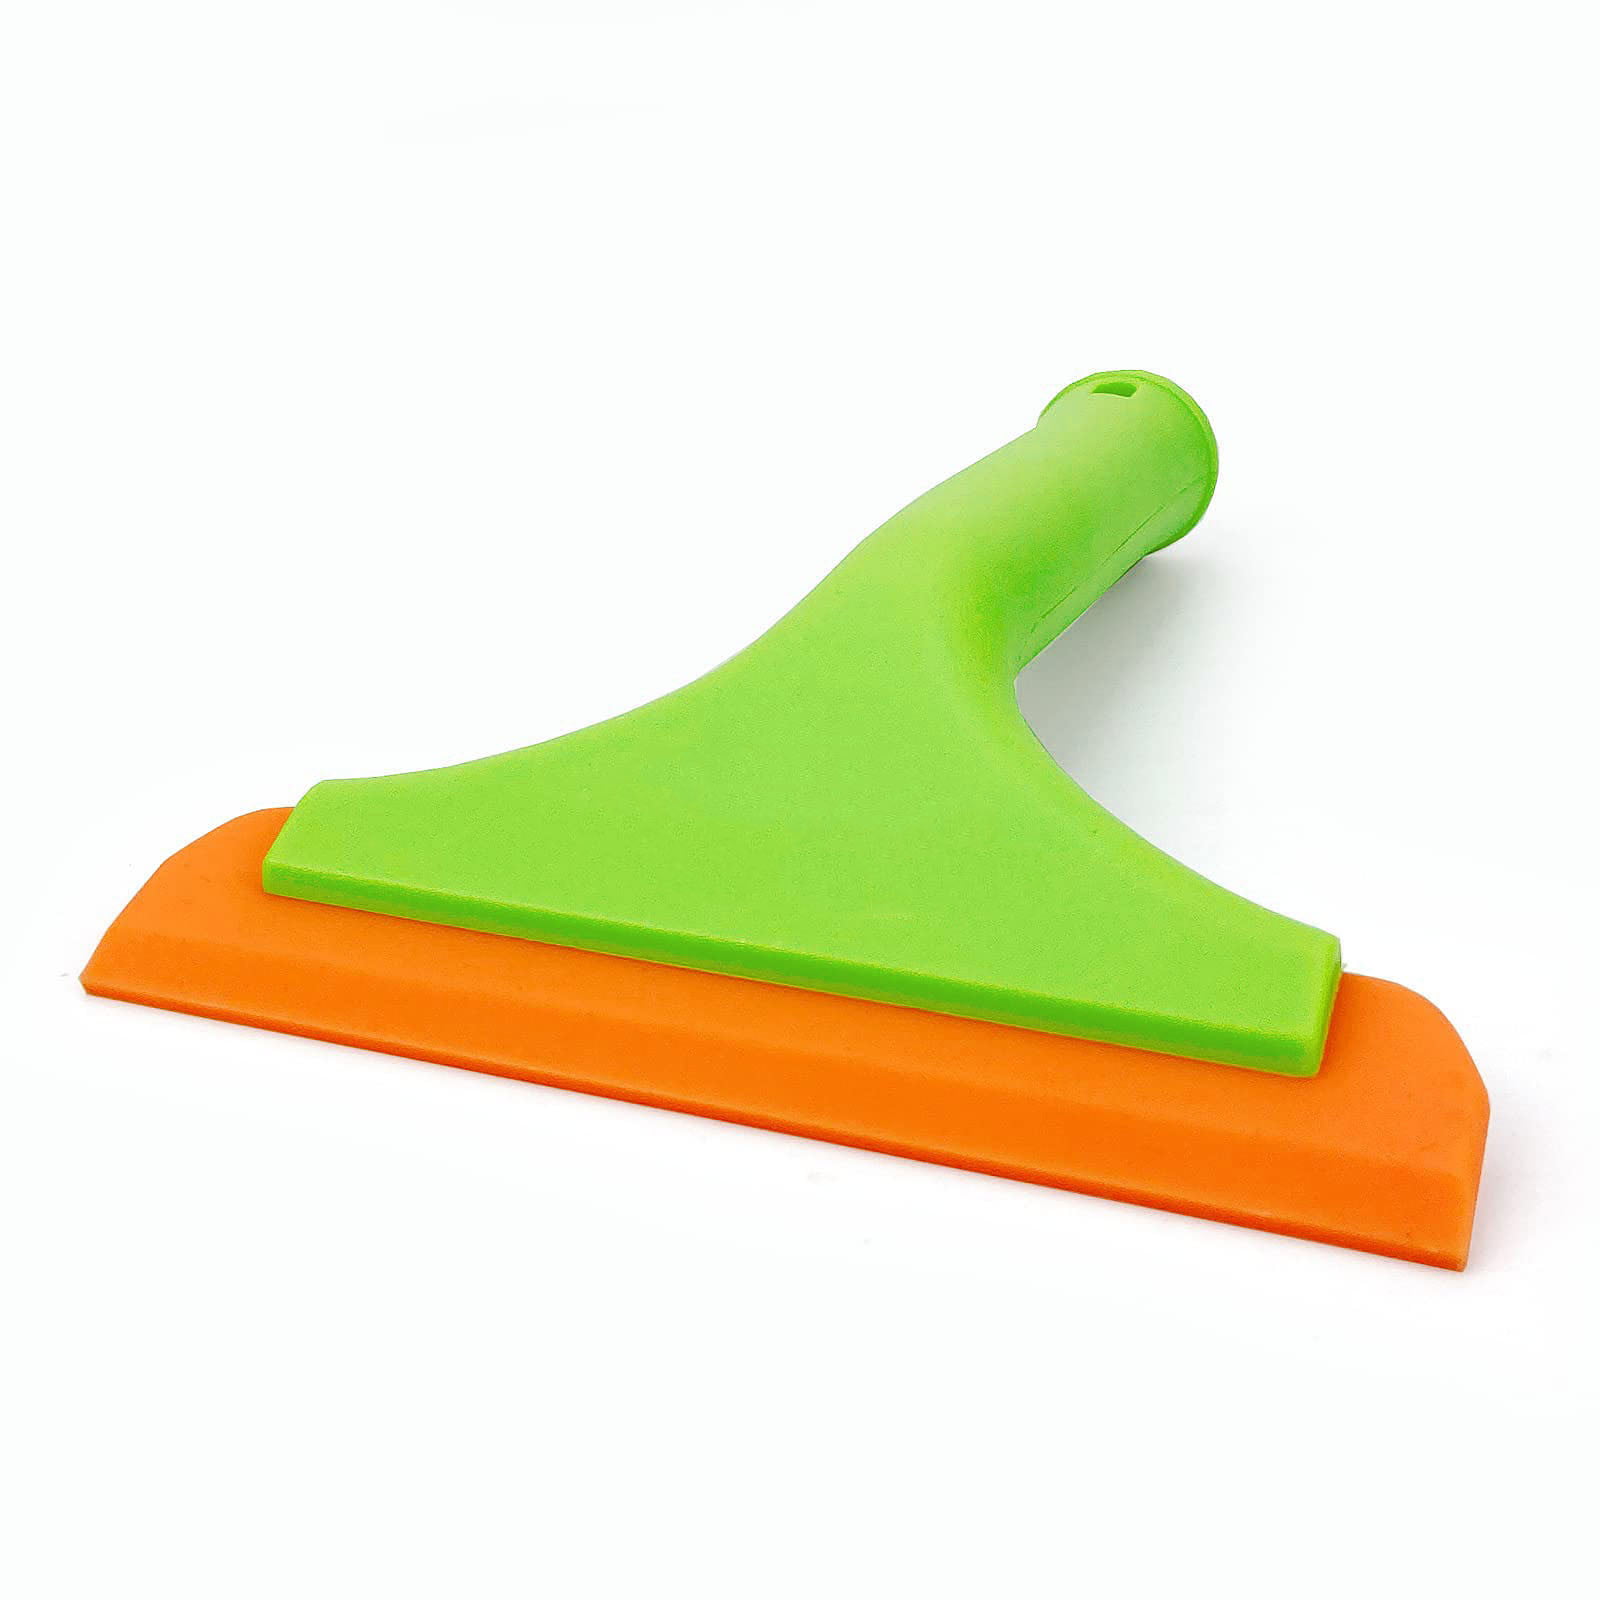 Ladieshow Car Squeegee Water Blade, Premium Silicone Squeegee T-Bar Scraper  Window Cleaner Tool for Car